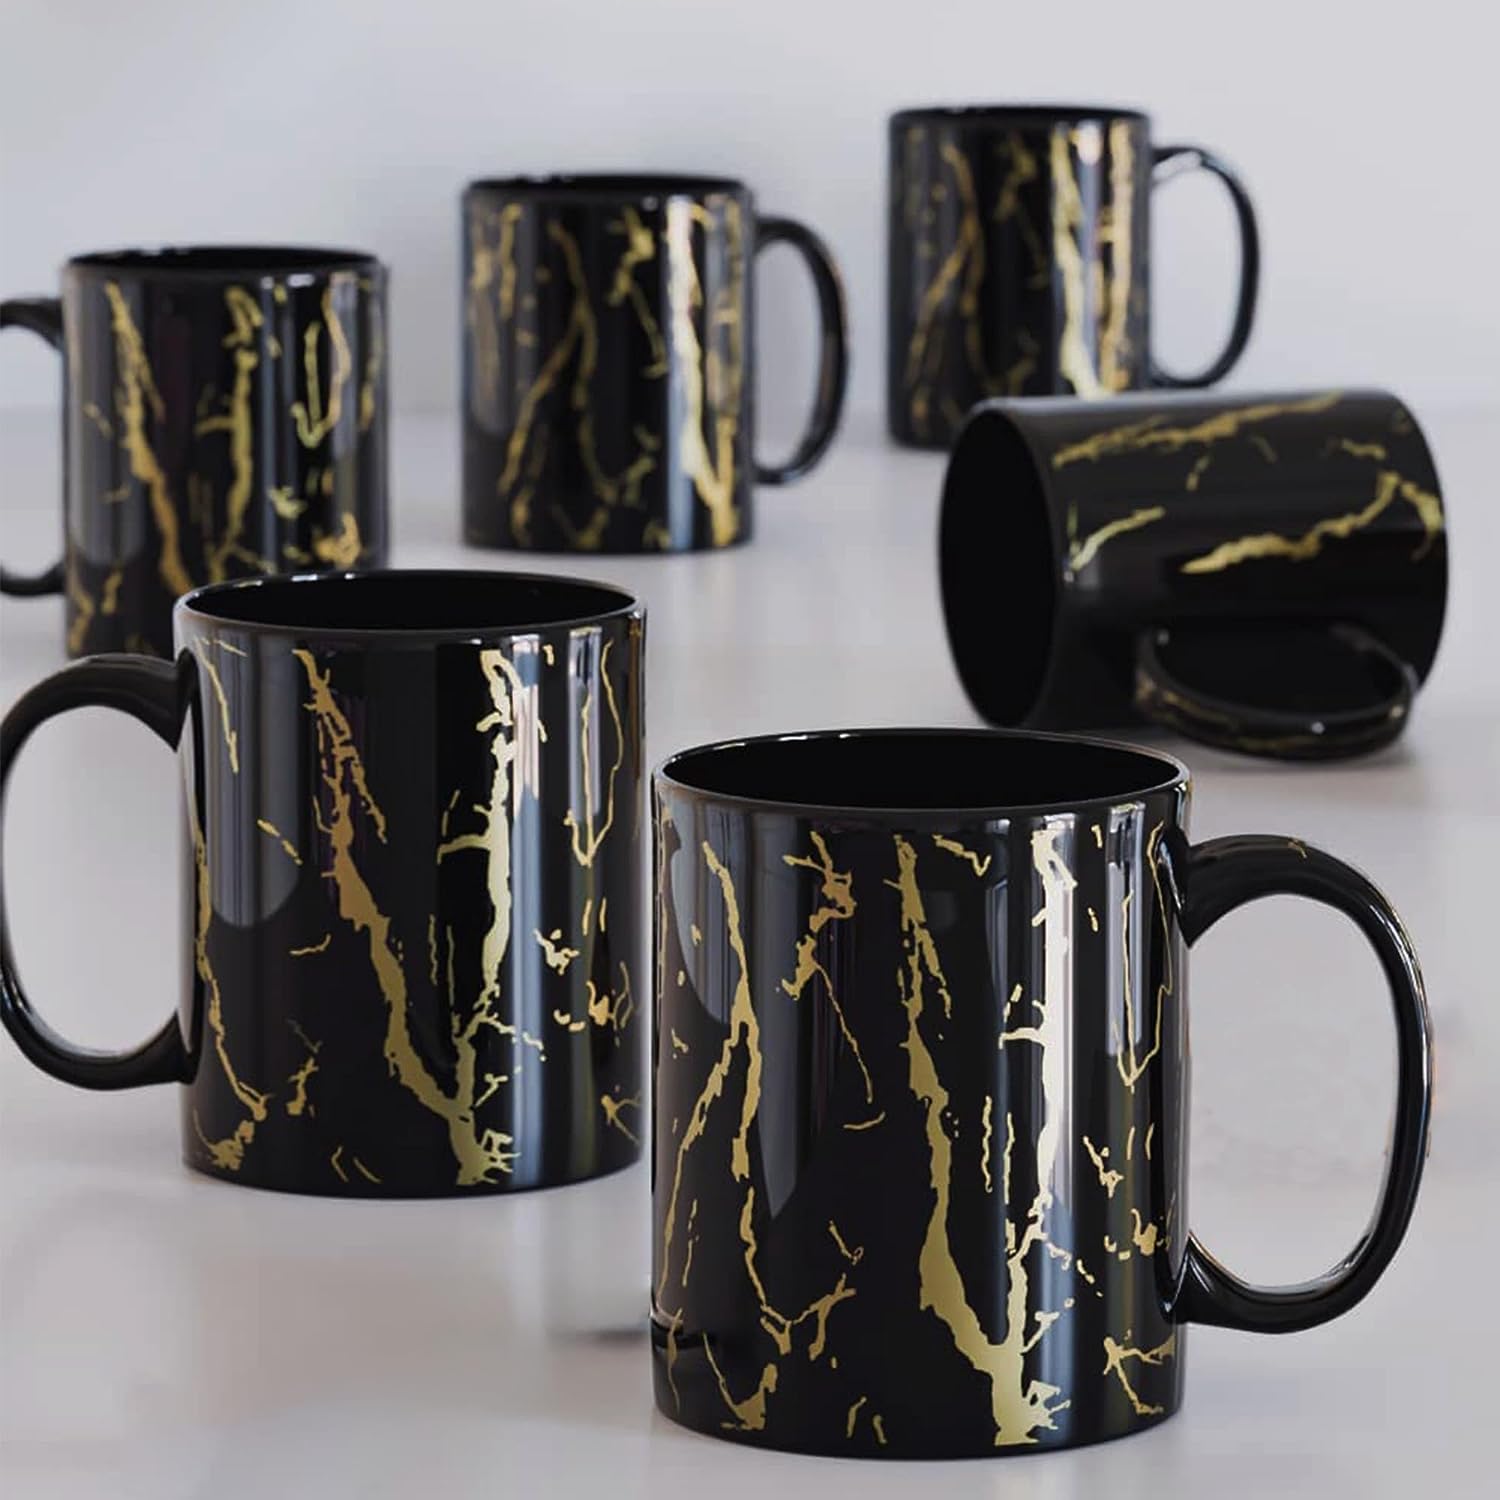 Tarnished Metal Copper Texture - Natural Marbling Industrial Art Coffee Mug  by PIPA Fine Art - Simply Solid - Pixels